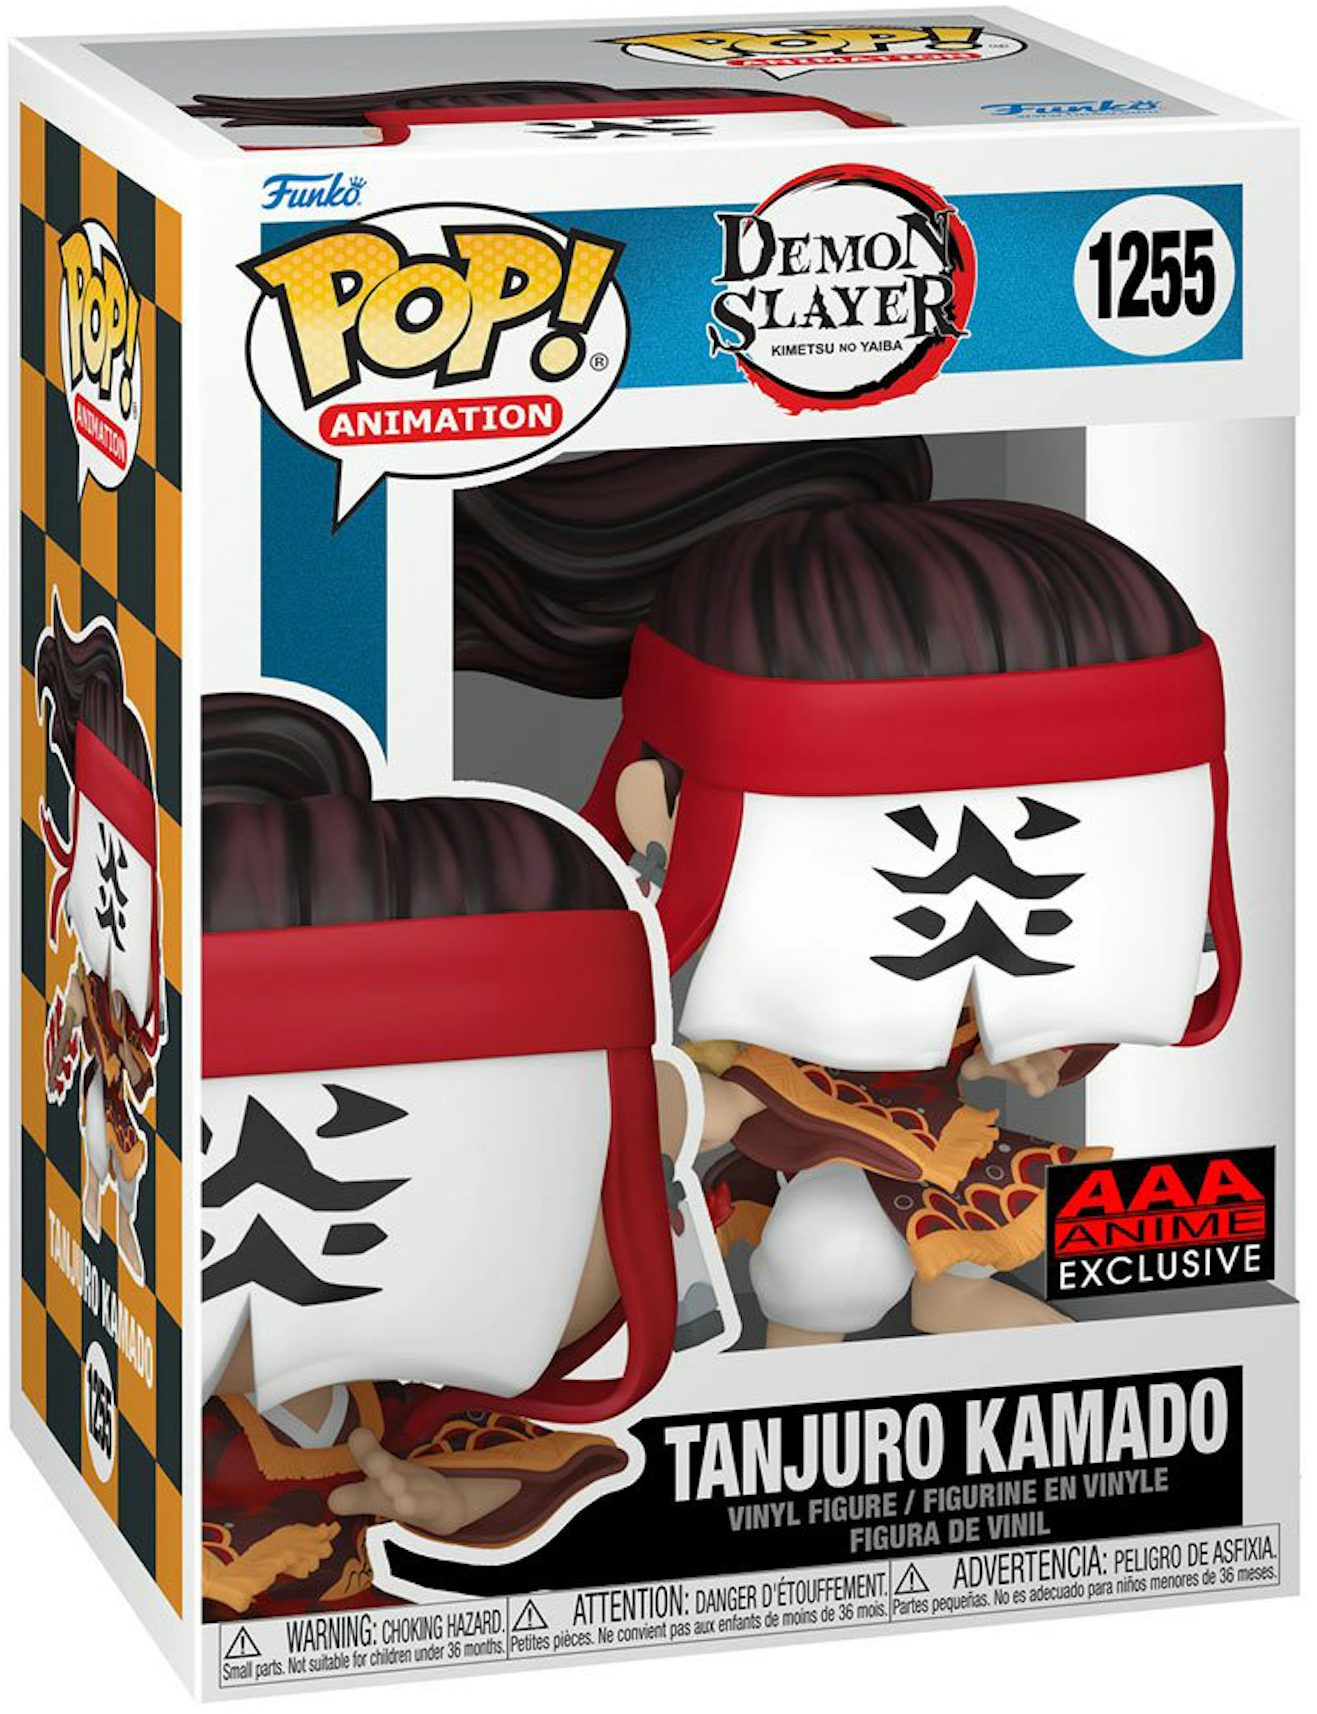 https://images.stockx.com/images/Funko-Pop-Animation-Demon-Slayer-Tanjuro-Kamado-AAA-Anime-Exclusive-Figure-1255.jpg?fit=fill&bg=FFFFFF&w=1200&h=857&fm=jpg&auto=compress&dpr=2&trim=color&updated_at=1673666212&q=60